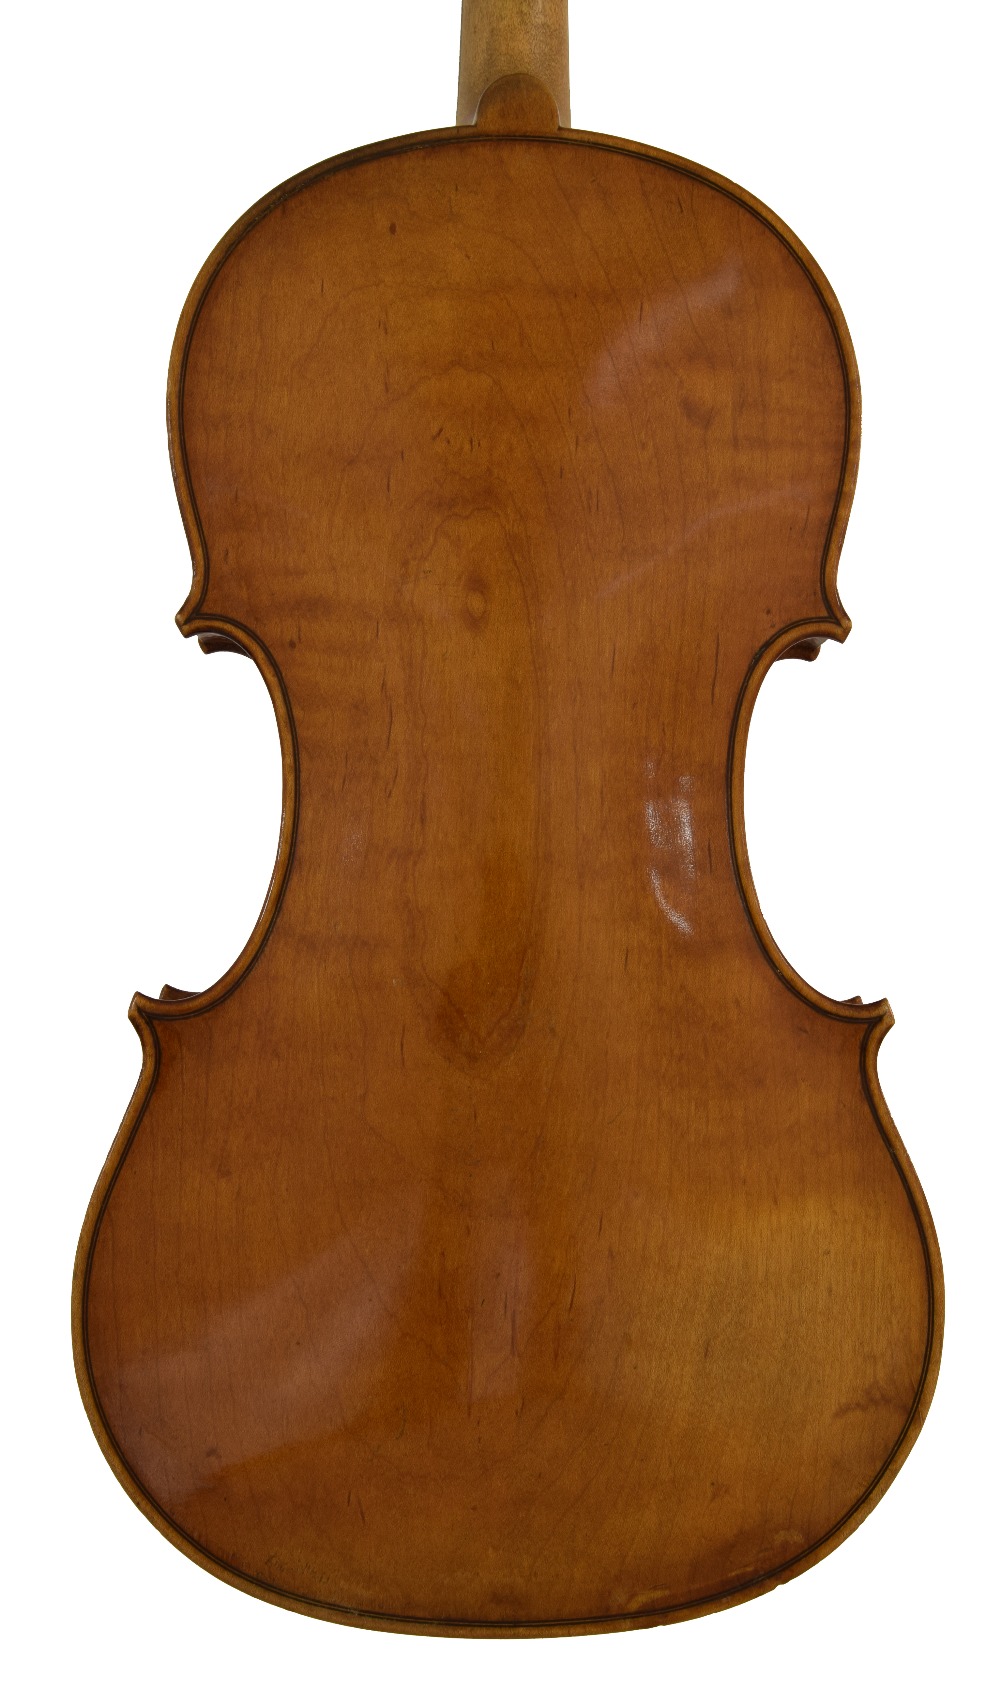 English violin by and labelled Made by John Smith, Teddington, London W., the one piece back of - Image 2 of 3